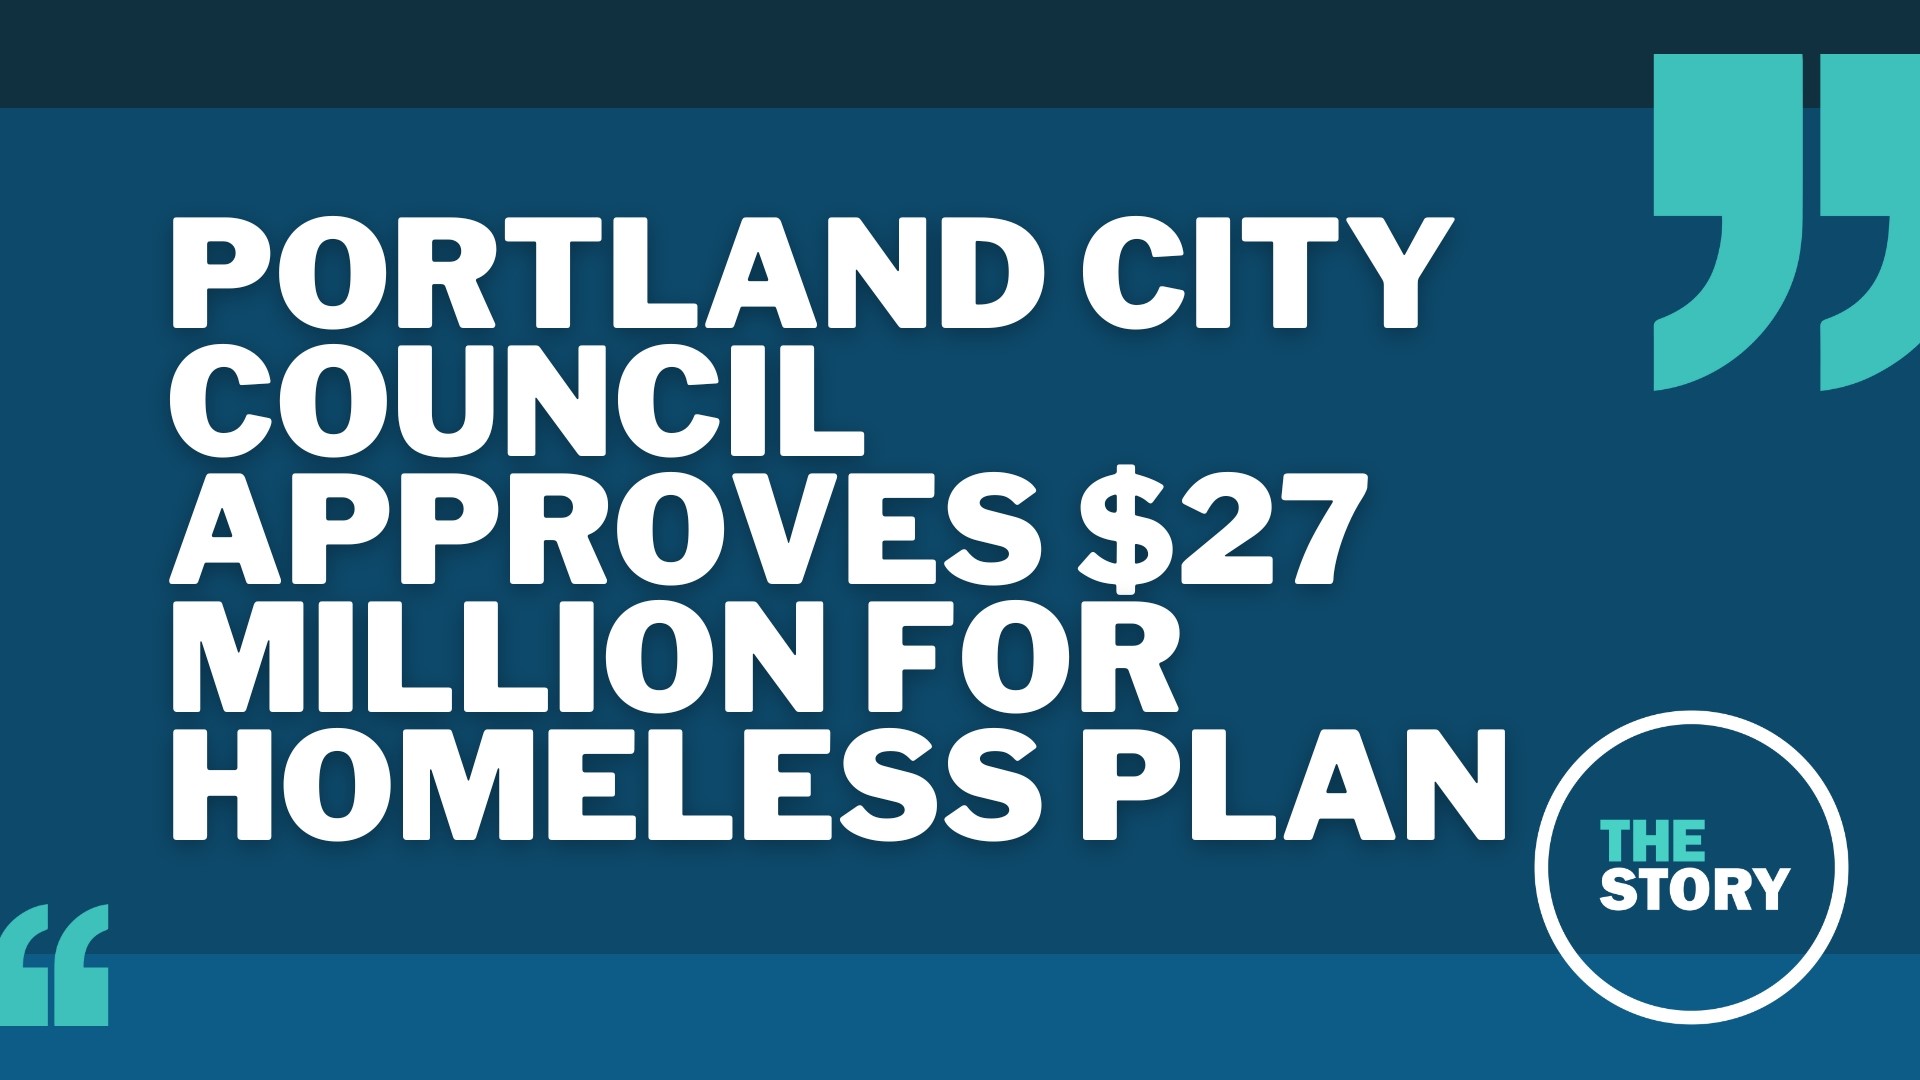 As part of a revised budget, city commissioners voted to put $27 million toward Wheeler’s sweeping plan to address homelessness.